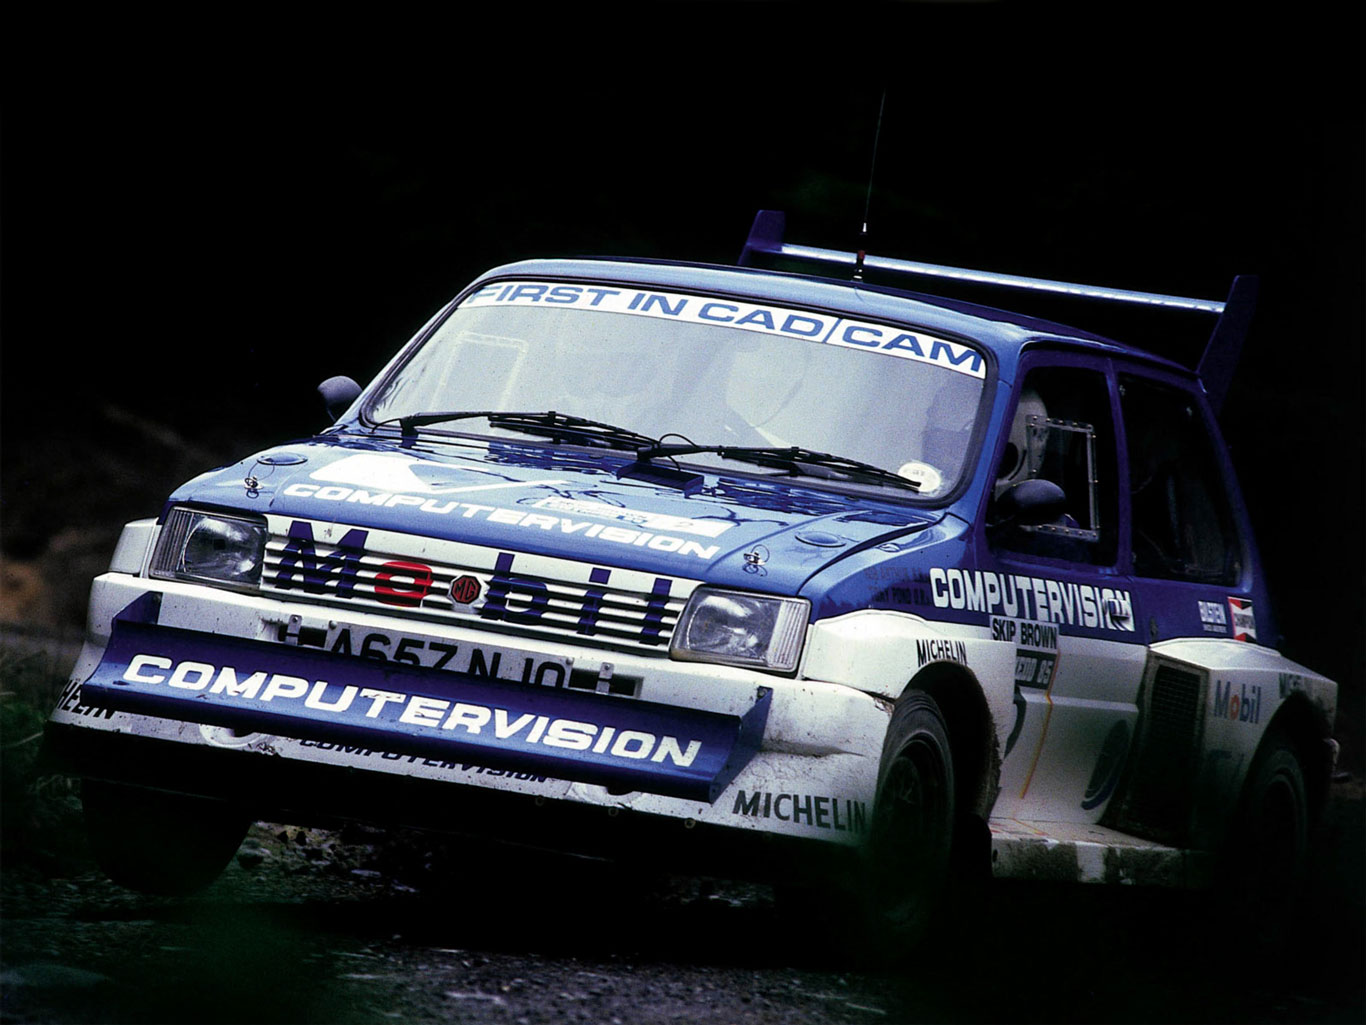 The MG Metro 6R4: A Lesson in Punctuality